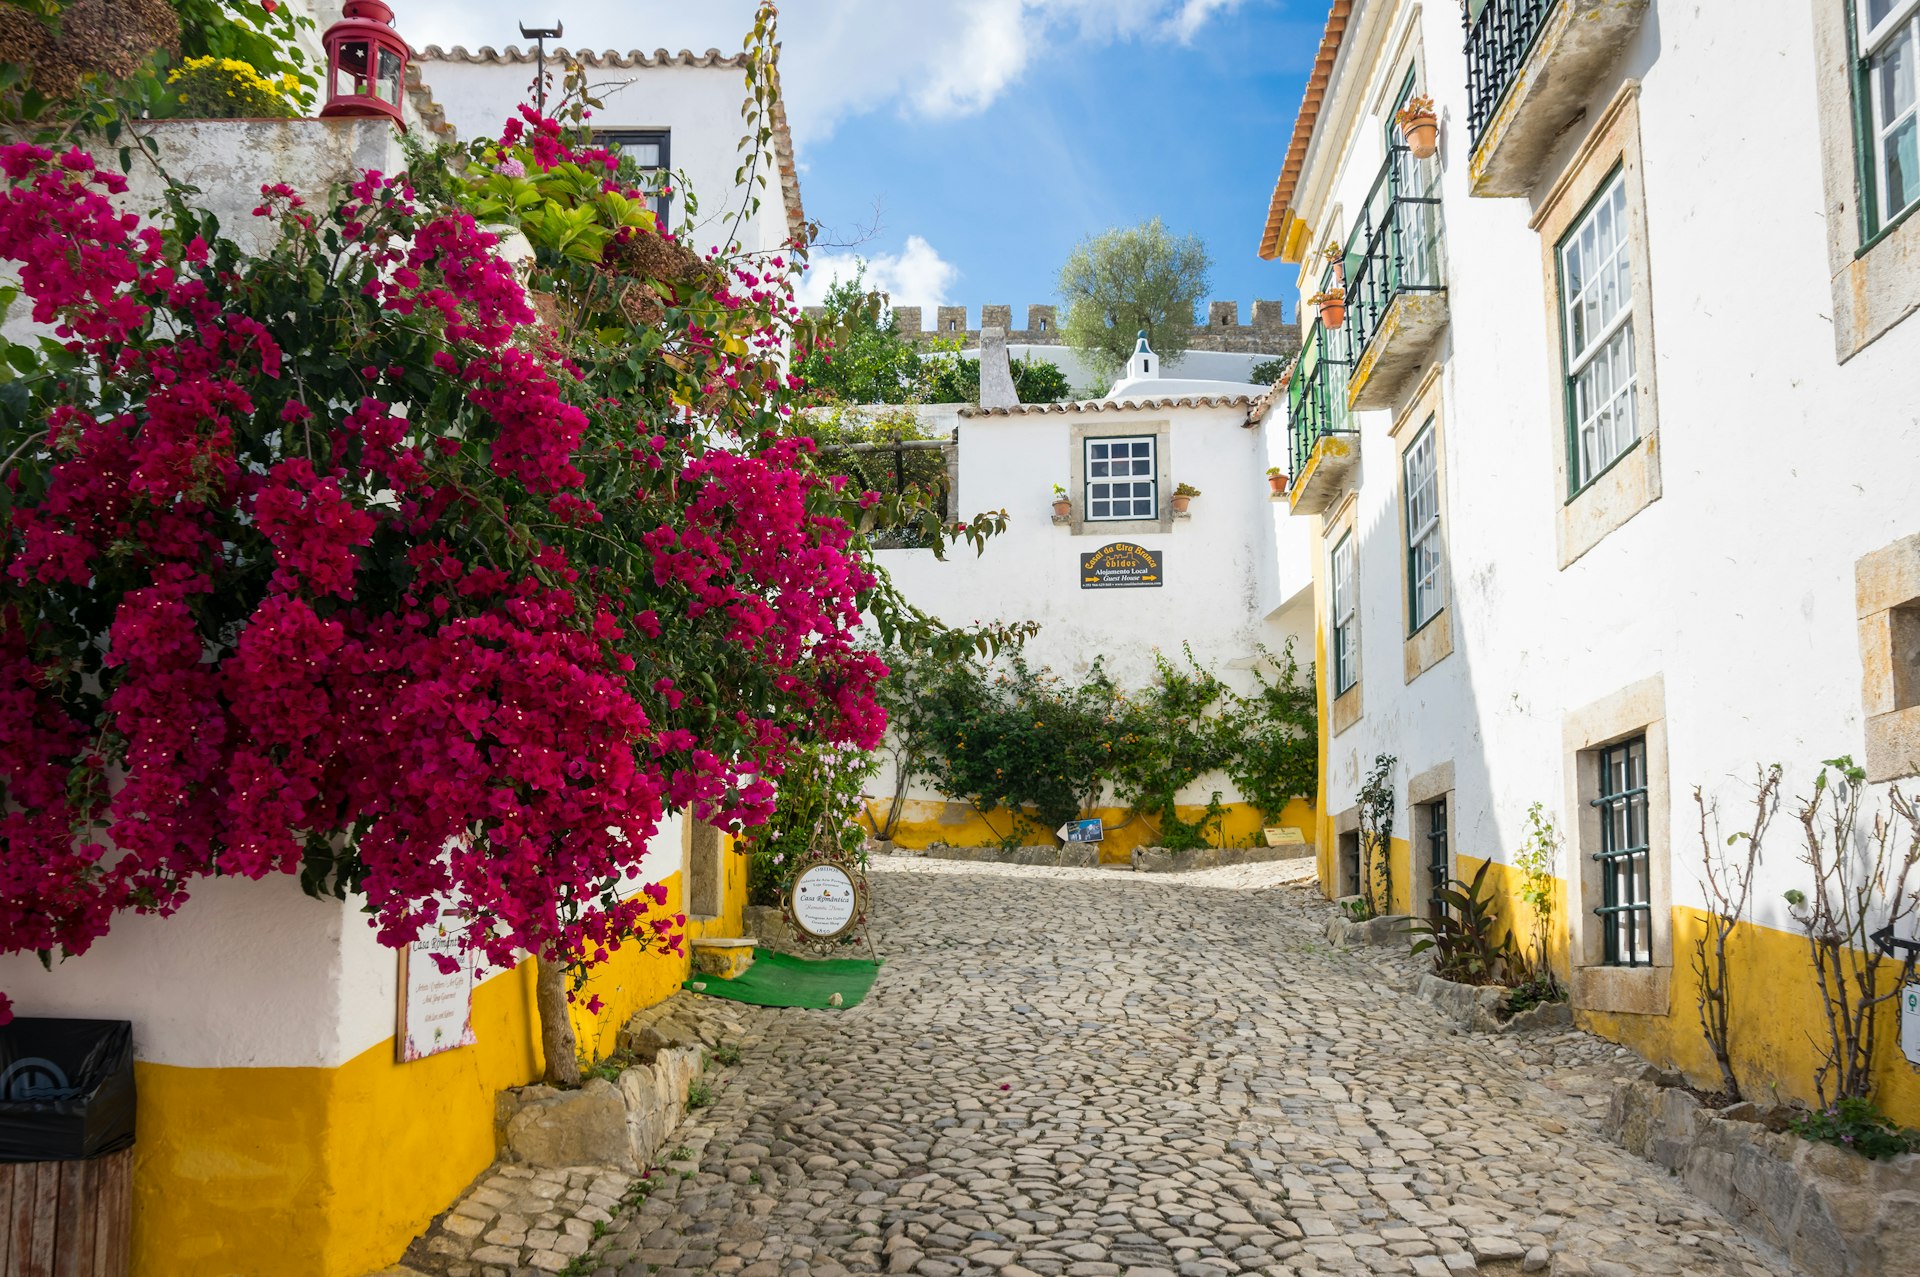 White-washed buildings with yellow trim are lined with bougainvillea in a Portuguese town. 